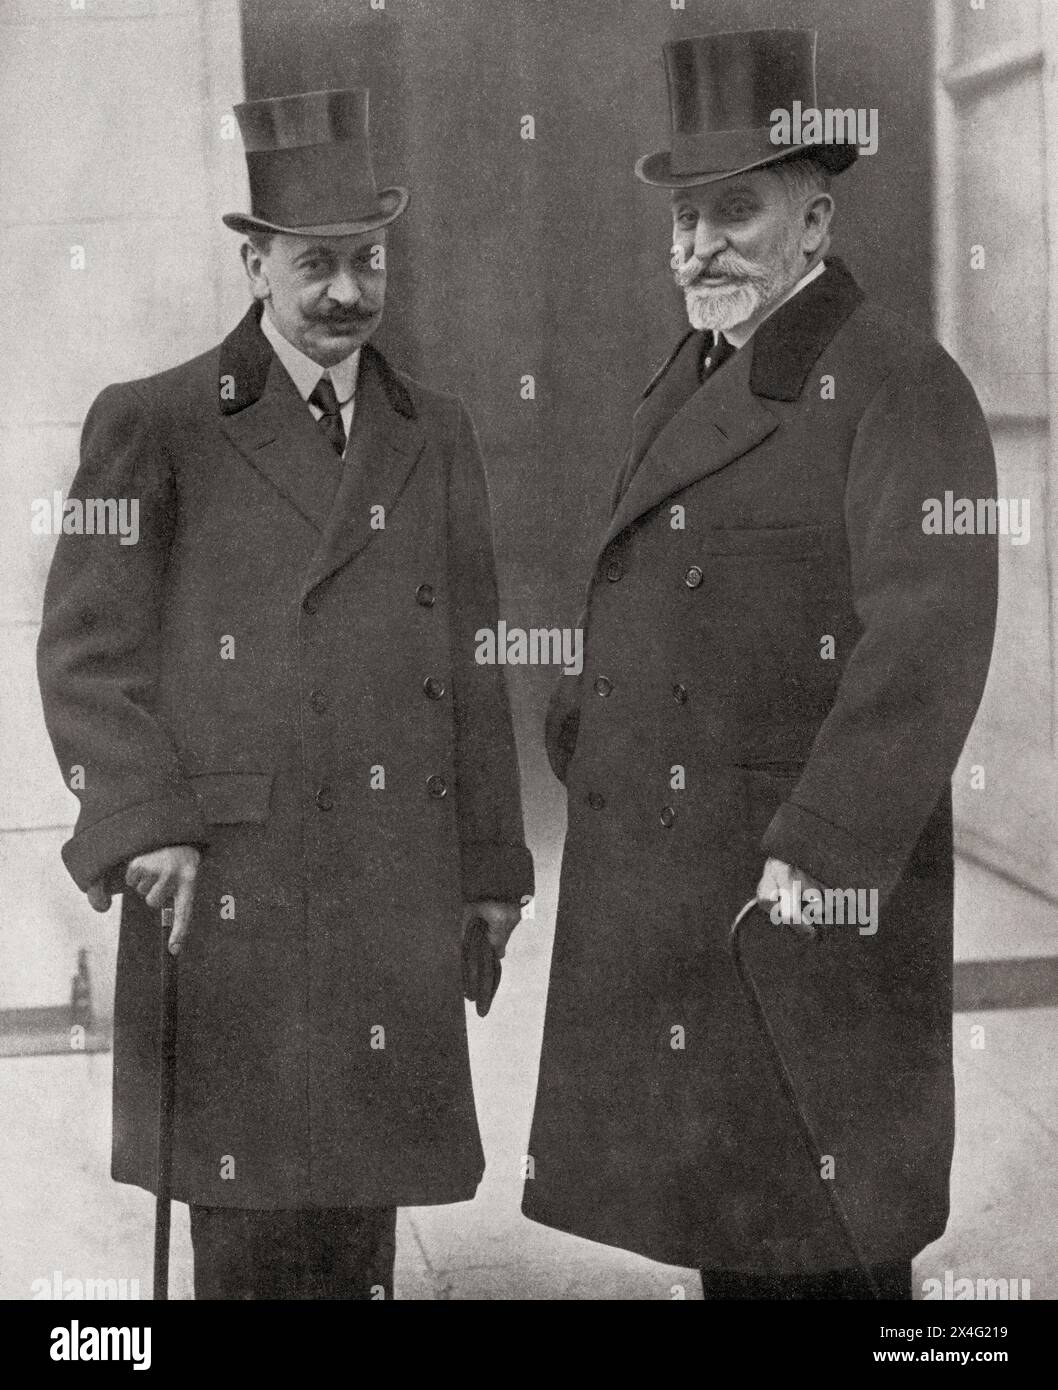 Léon Geoffray, right, and Manuel García Prieto, left, signees of the treaty between France and Spain regarding Morocco on 27 November 1912.  Léon Marcel Isidore Geoffray, 1852–1927. French diplomat and Ambassador to Madrid. Manuel García Prieto, 1st Marquis of Alhucemas, 1859 – 1938. Spanish politician and prime minister of Spain.  From Mundo Grafico, published 1912. Stock Photo